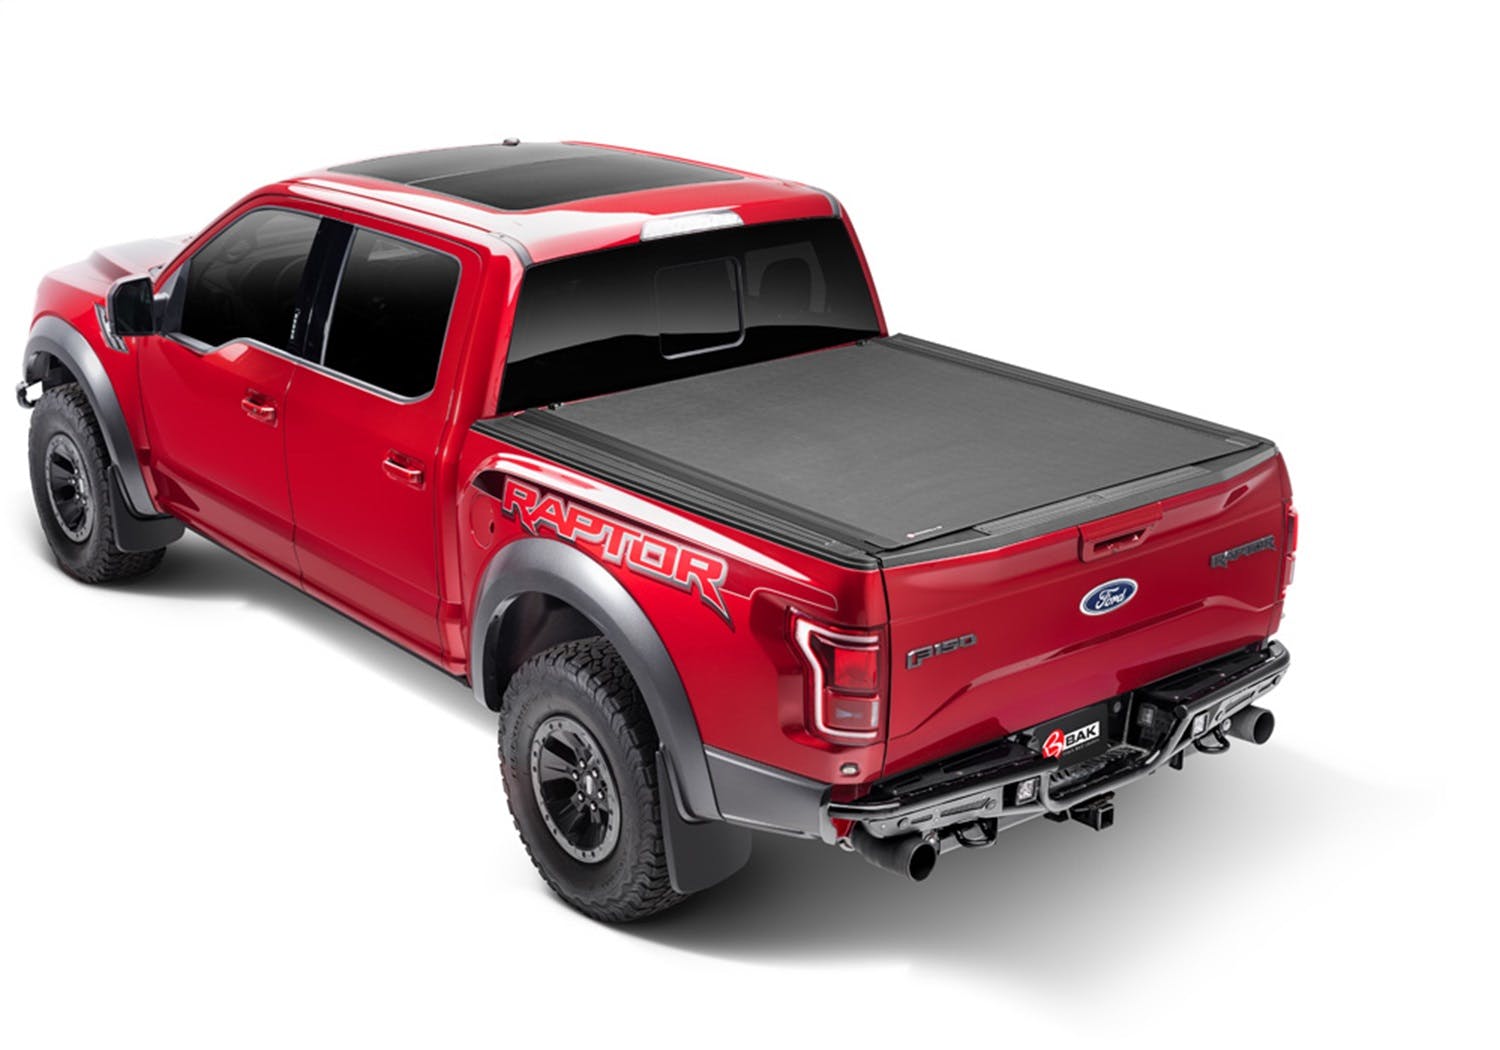 BAK Industries 80426 Revolver X4s Hard Rolling Truck Bed Cover